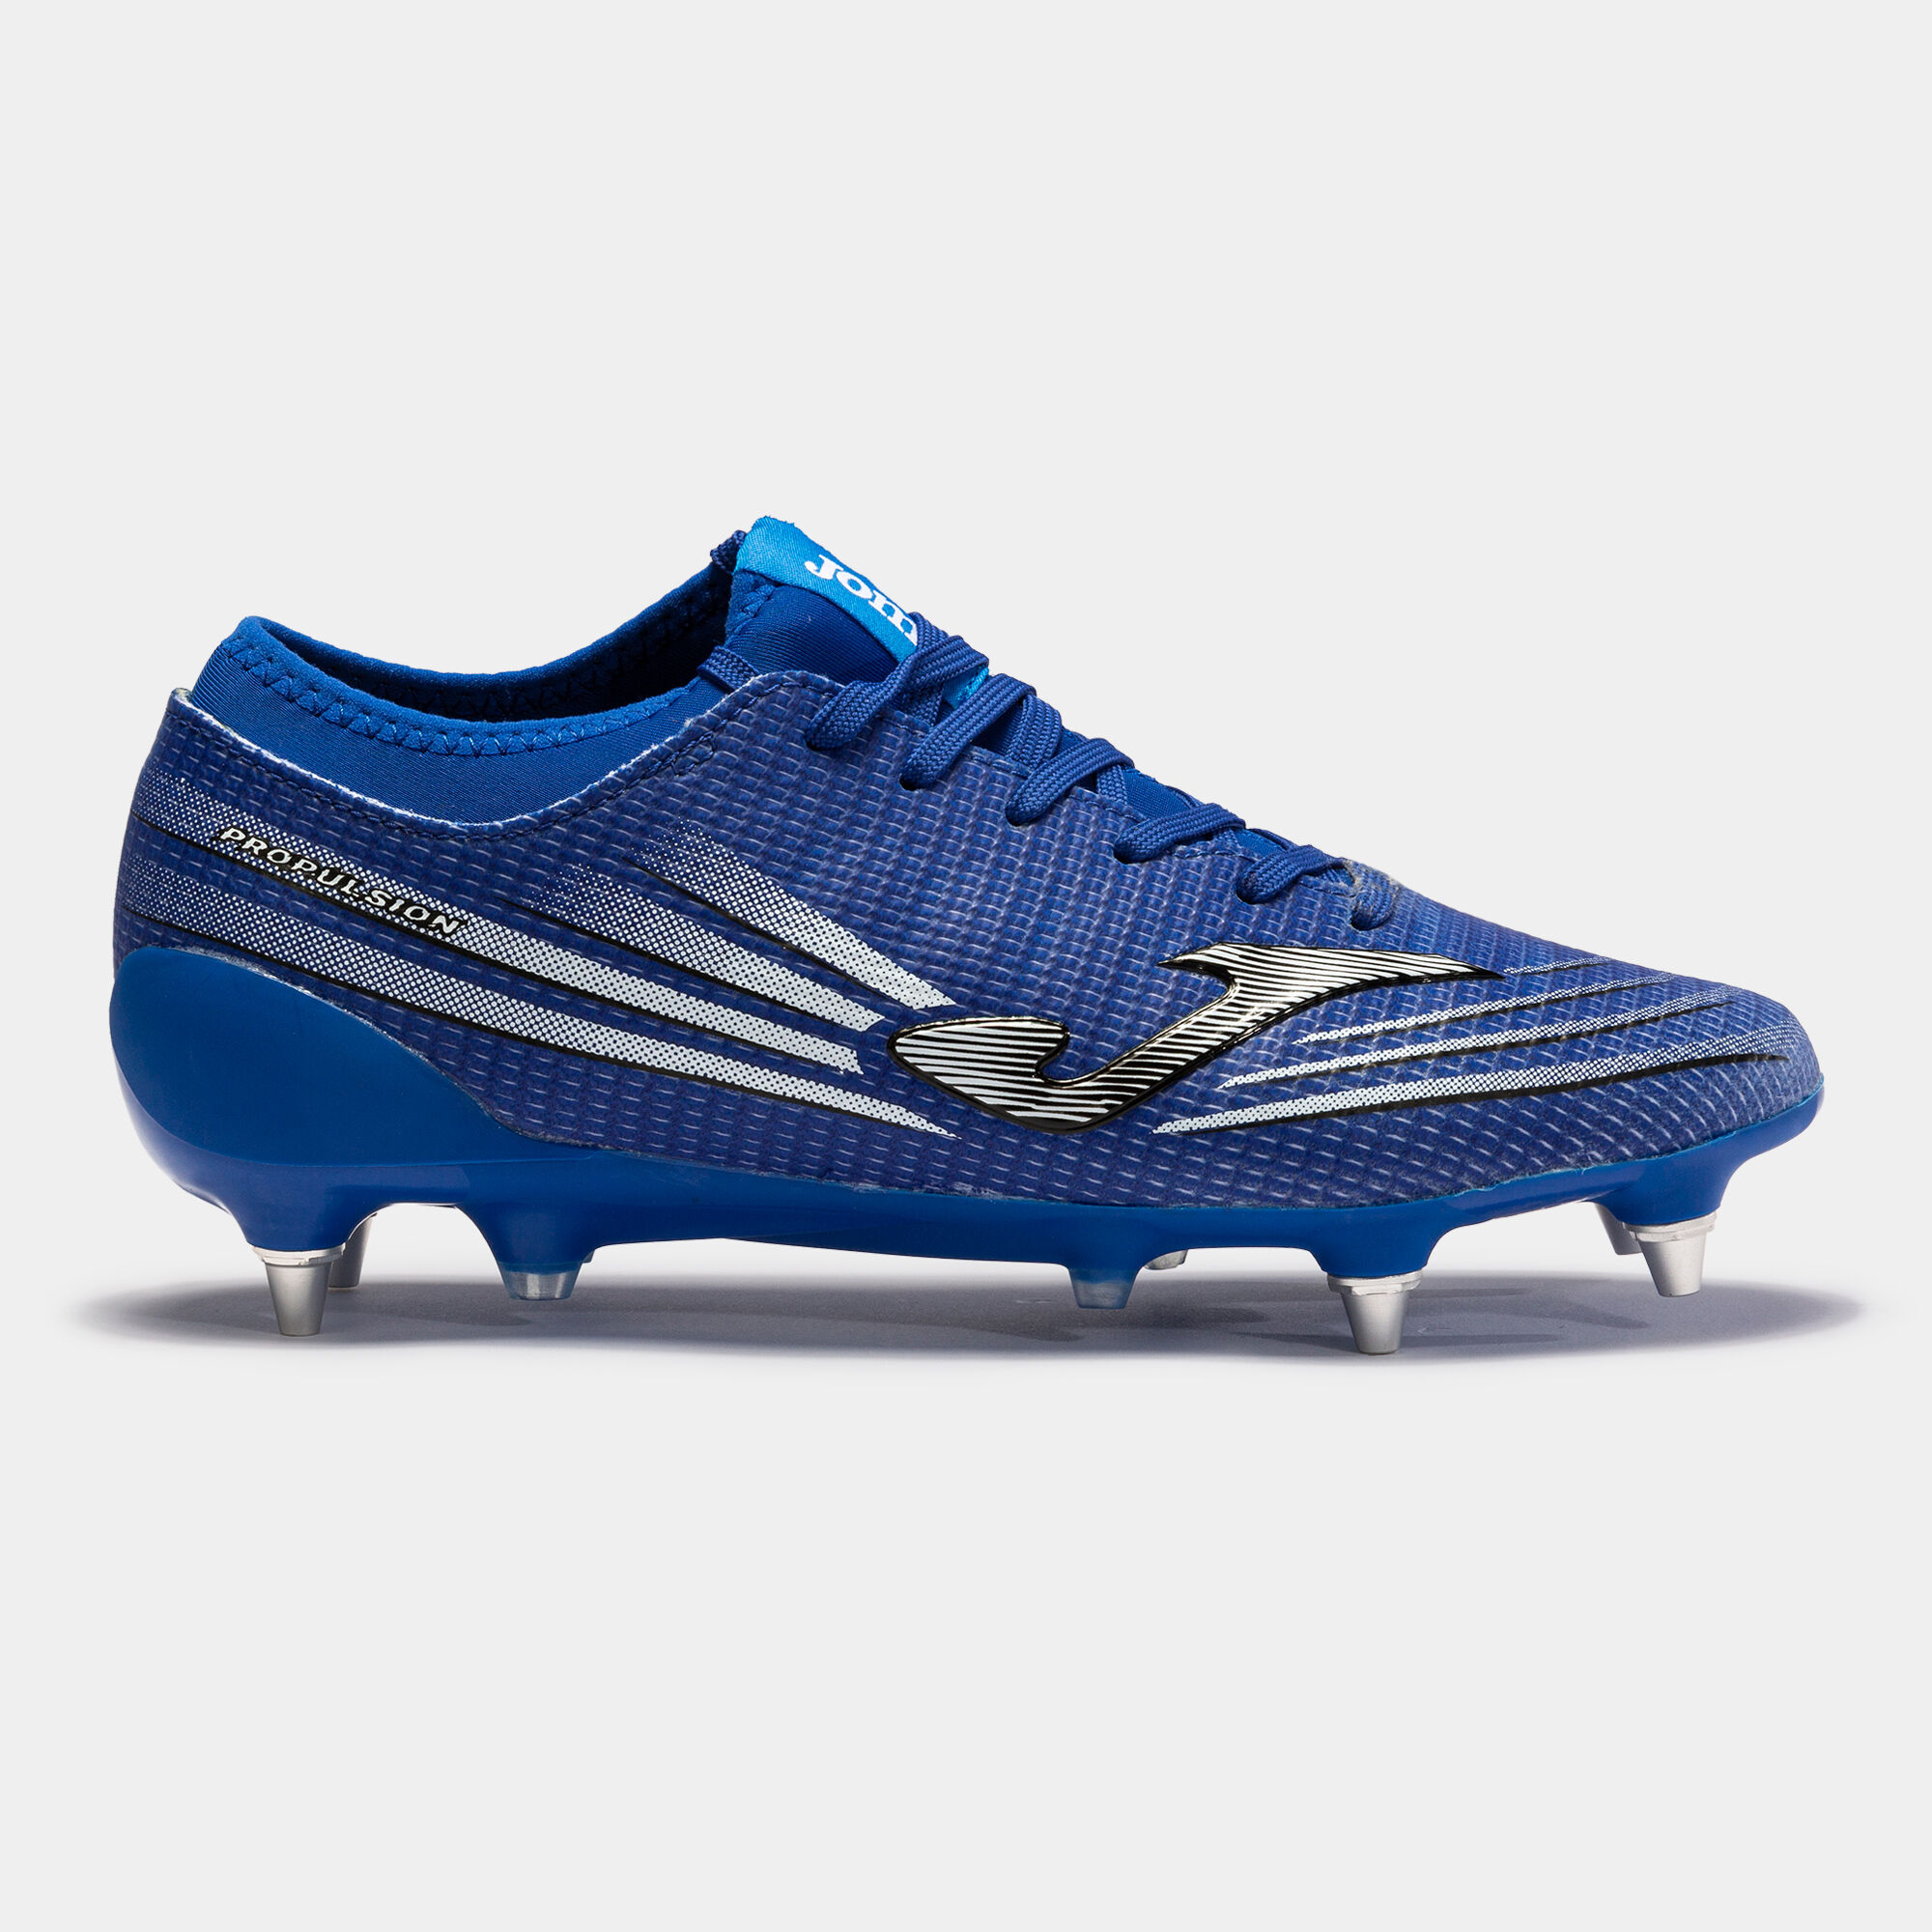 Football boots Propulsion Lite 21 soft ground royal blue